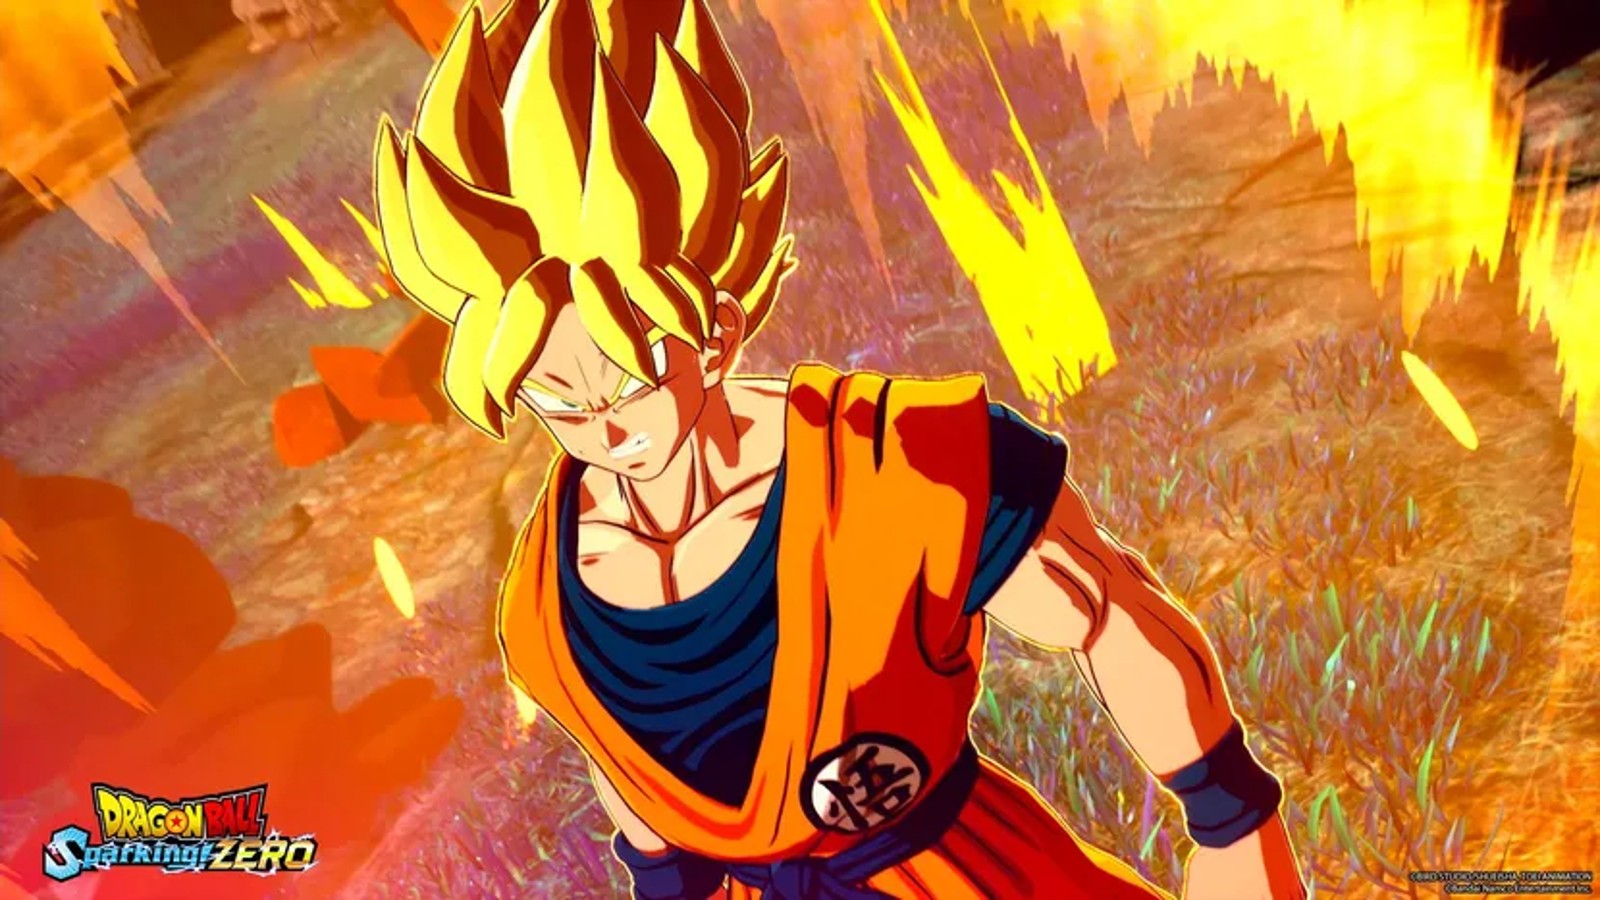 Dragon Ball: Sparking Zero Looks Like Everything We Wanted From